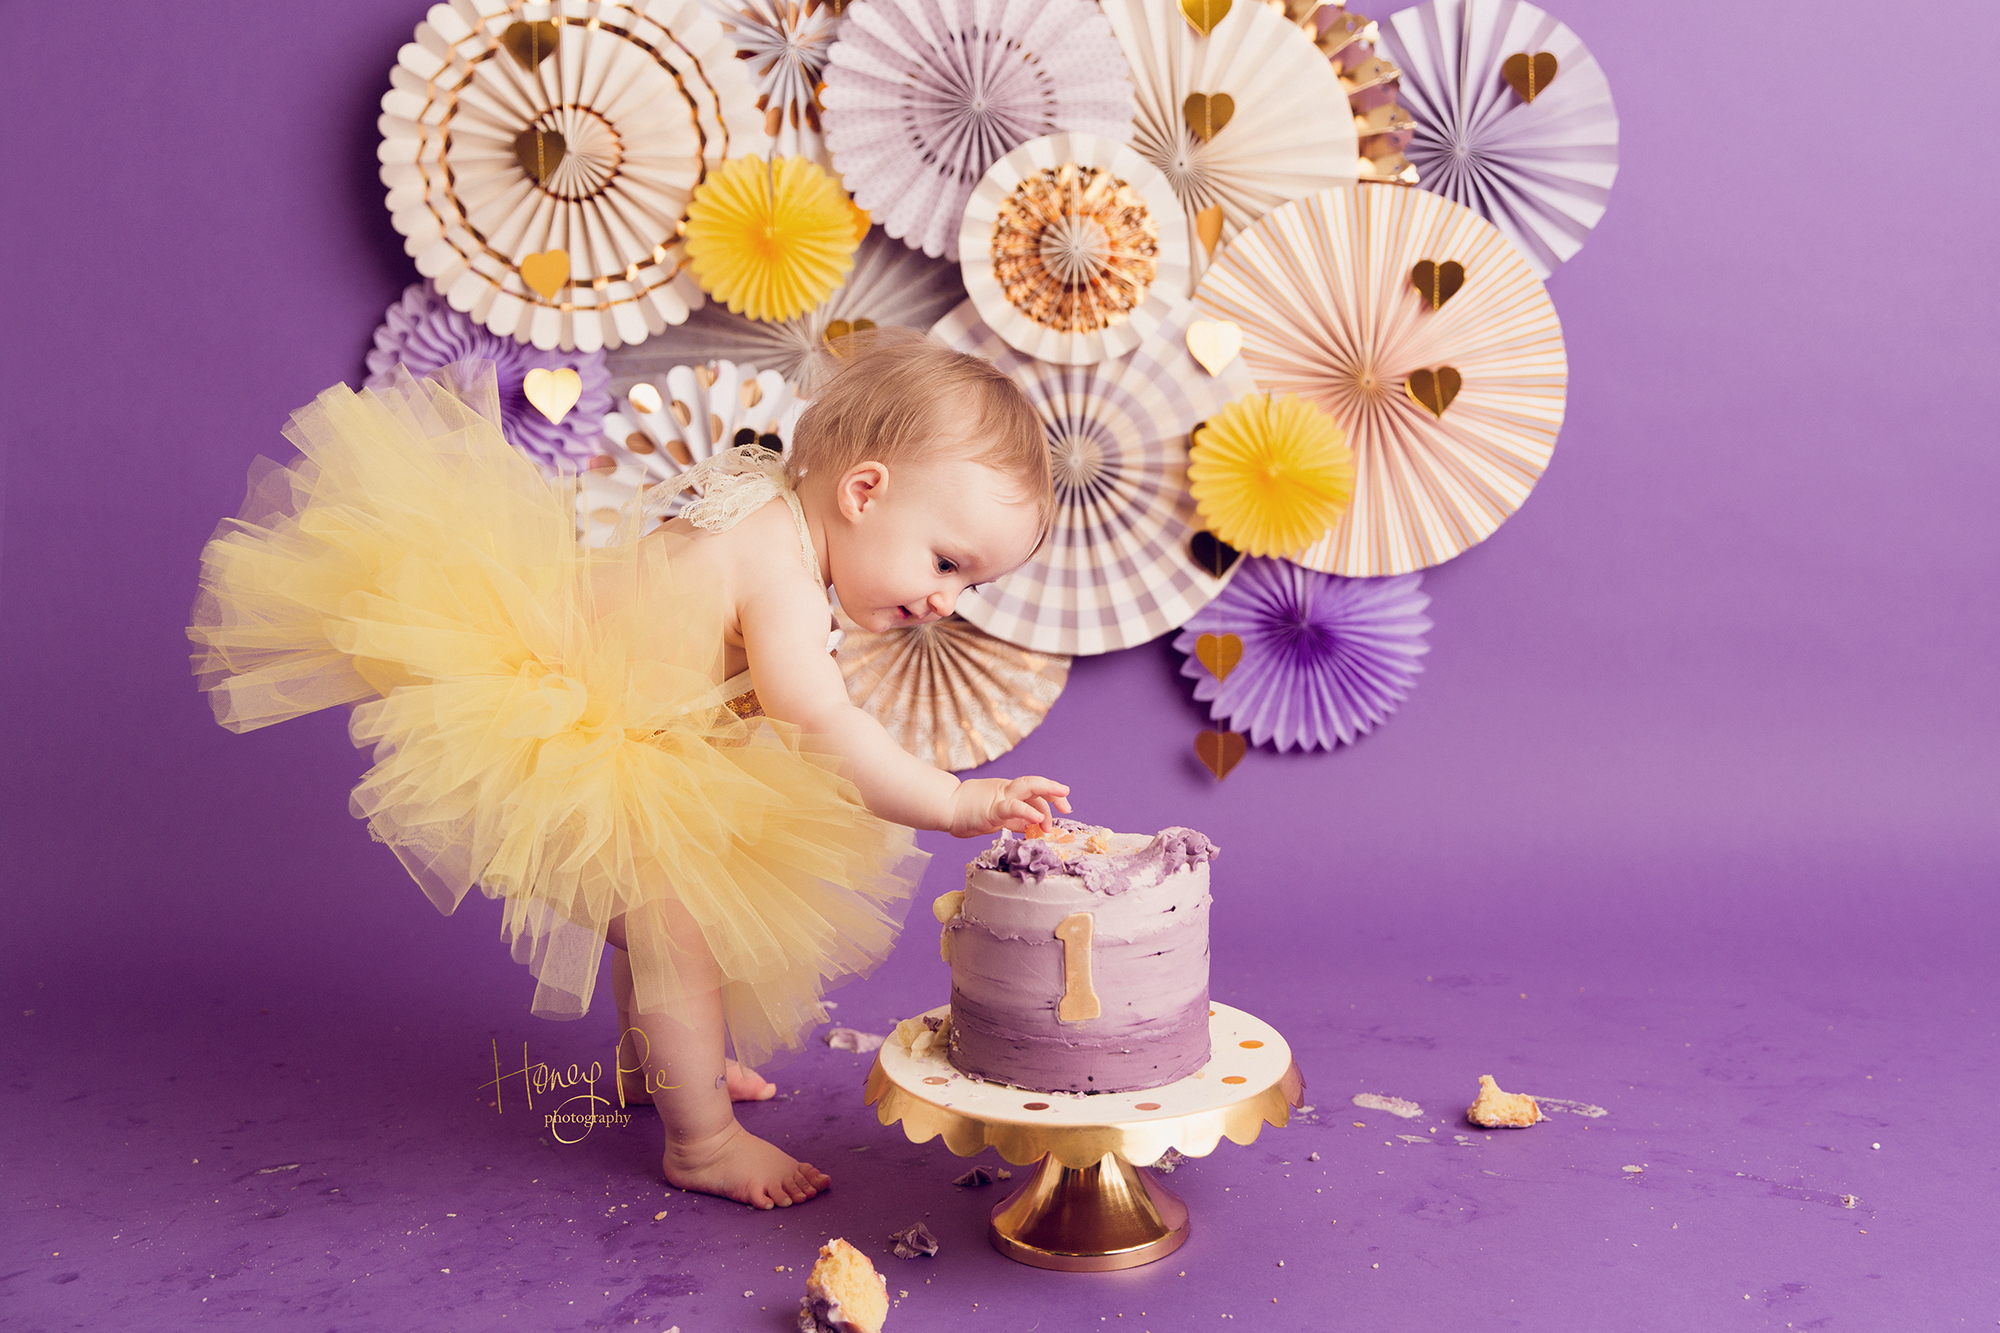 Baby delicately picking the icing off her first birthday cake wearing a bright yellow tutu